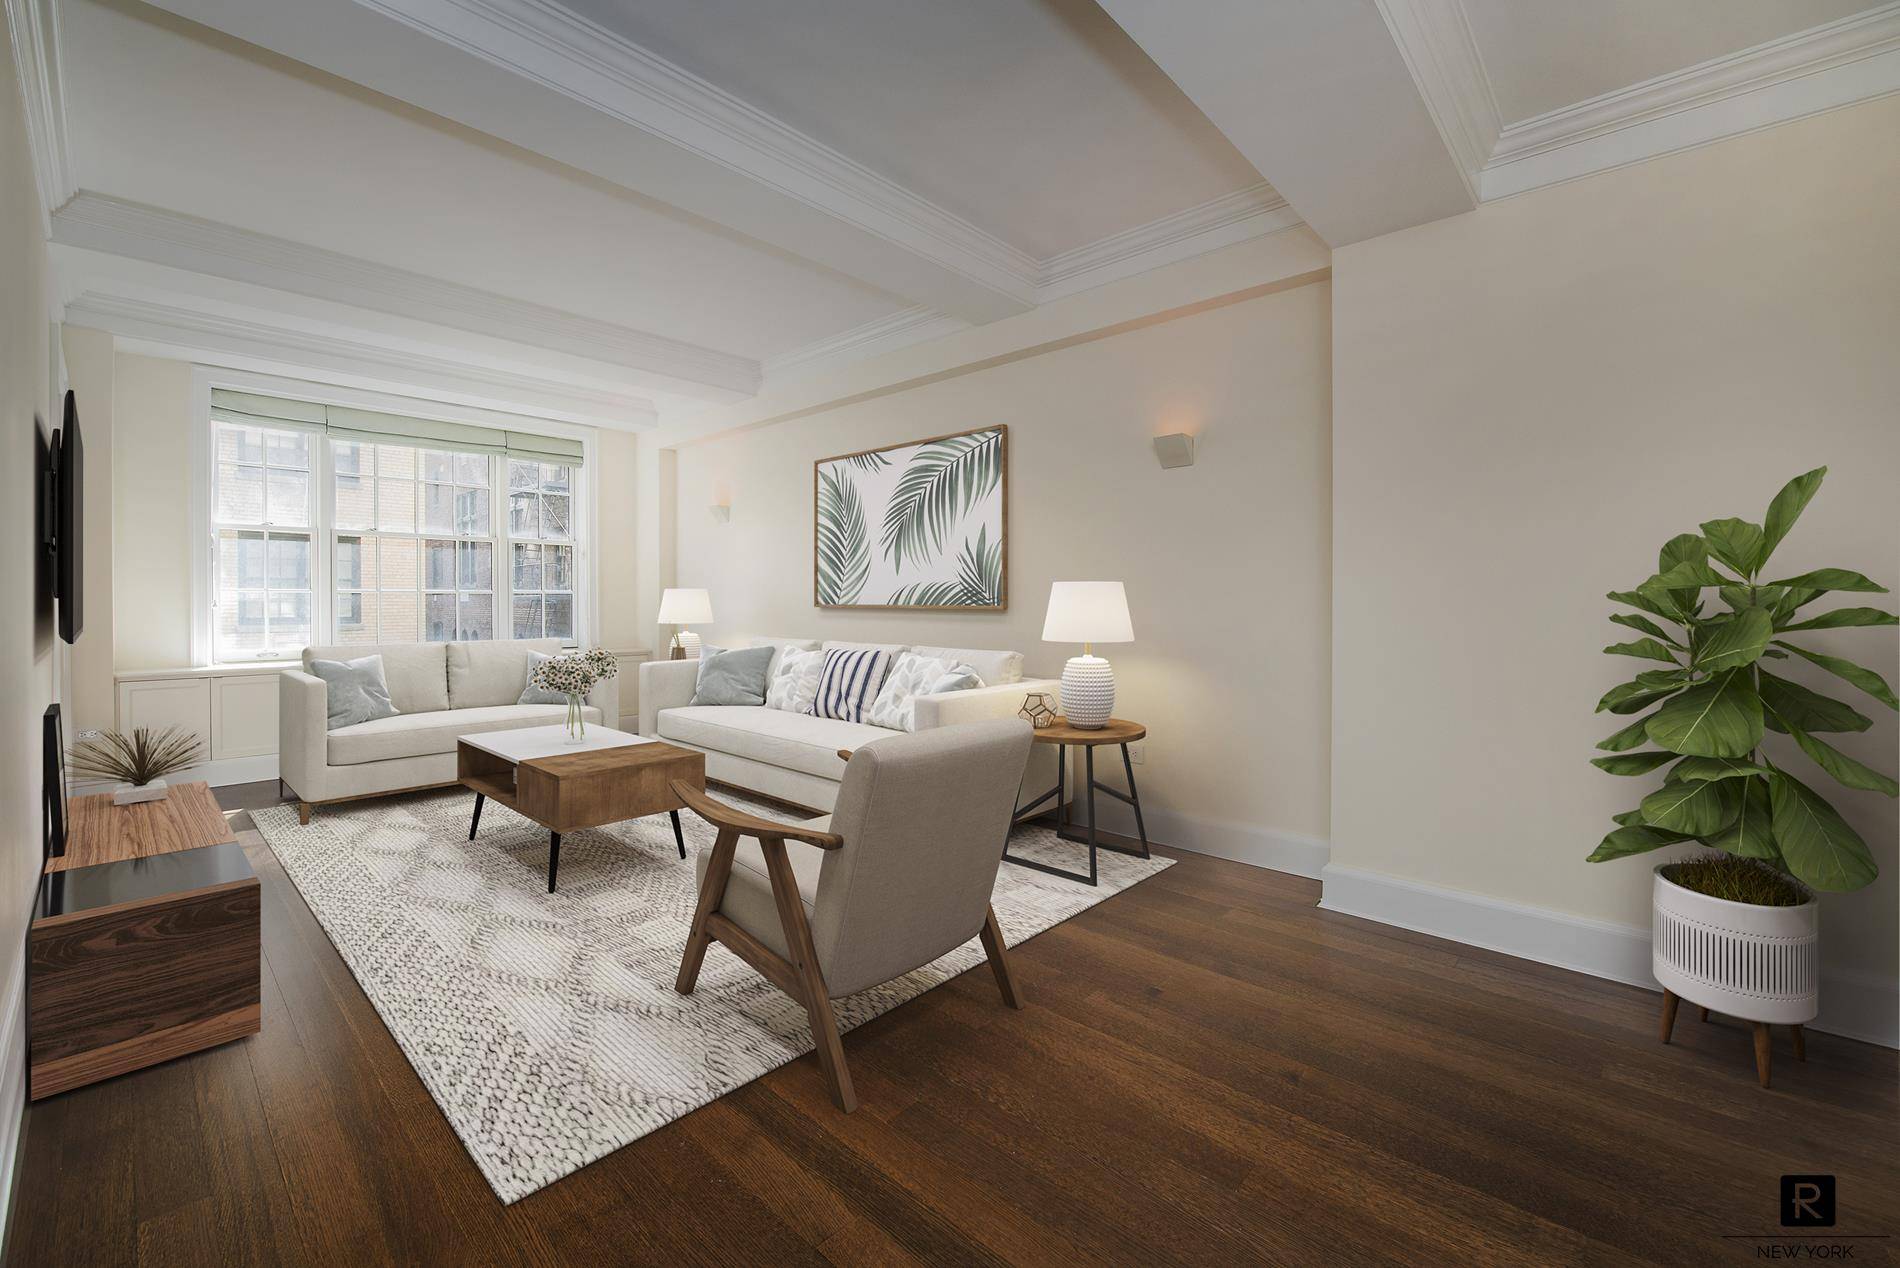 Quiet and elegantly renovated One Bedroom Condo facing east with views of the building's courtyard.